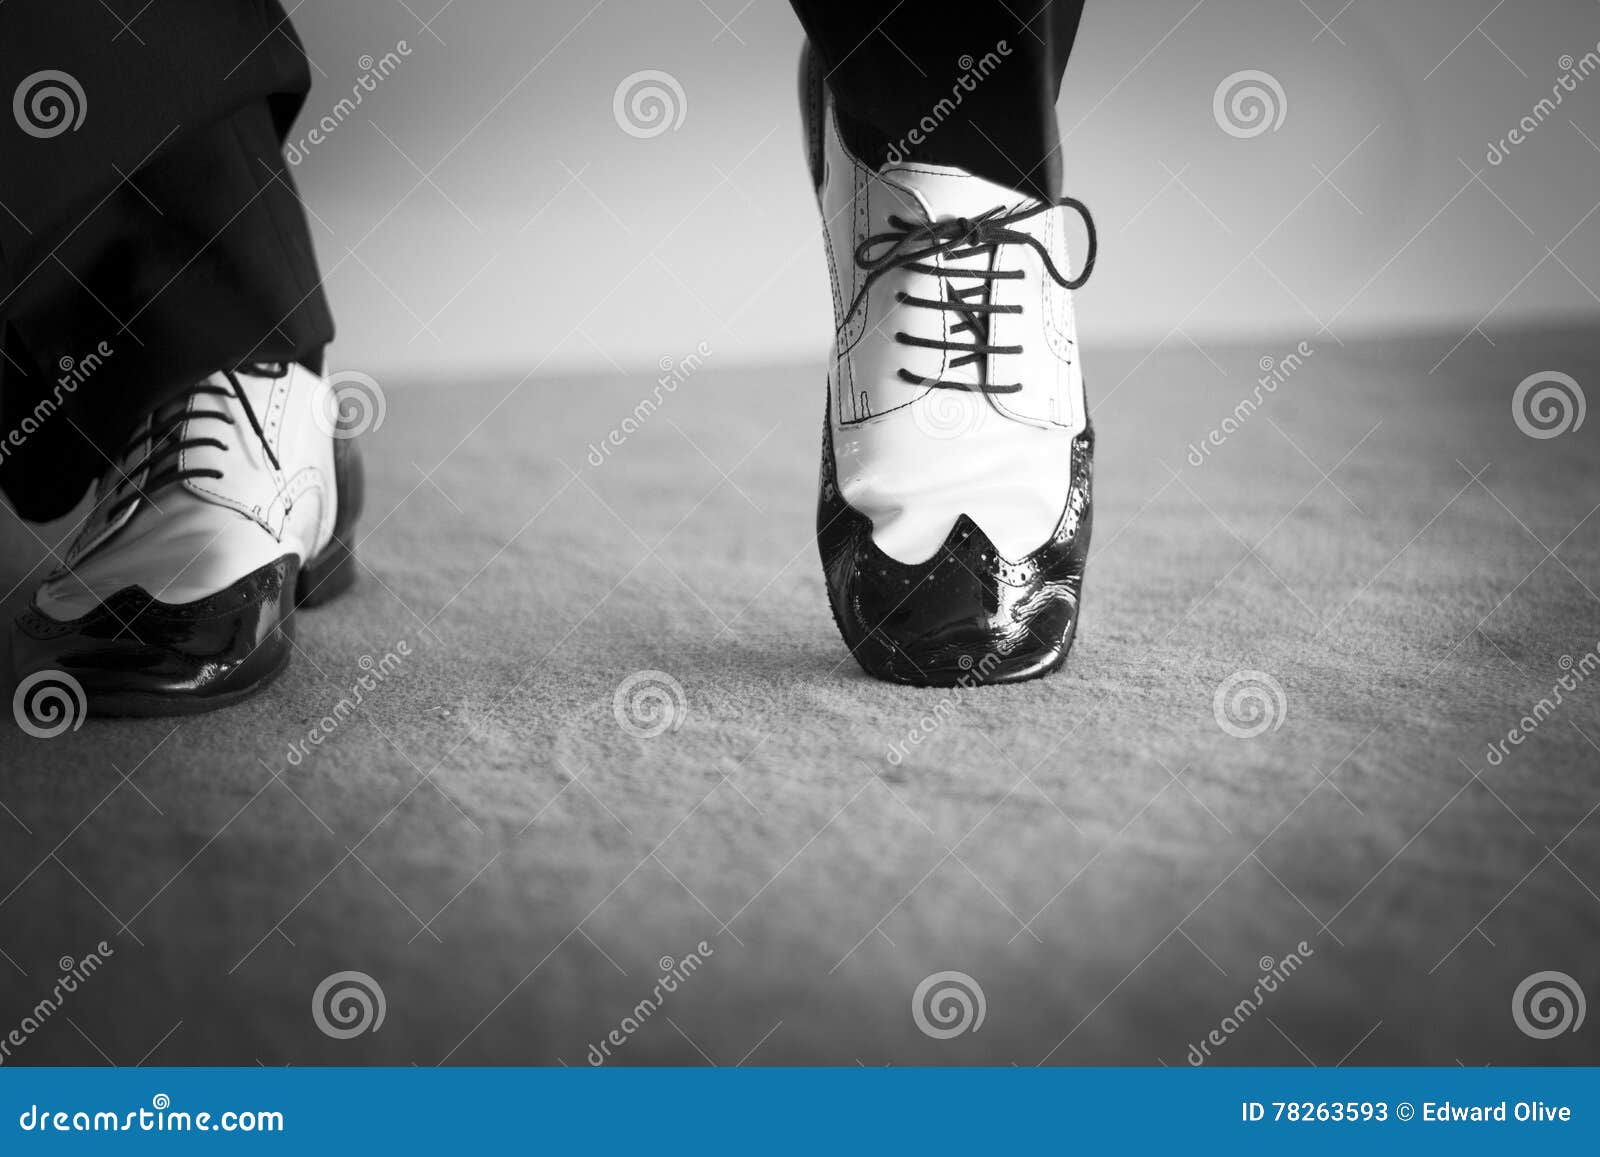 Male dancer dancing shoes stock image. Image of people - 78263593